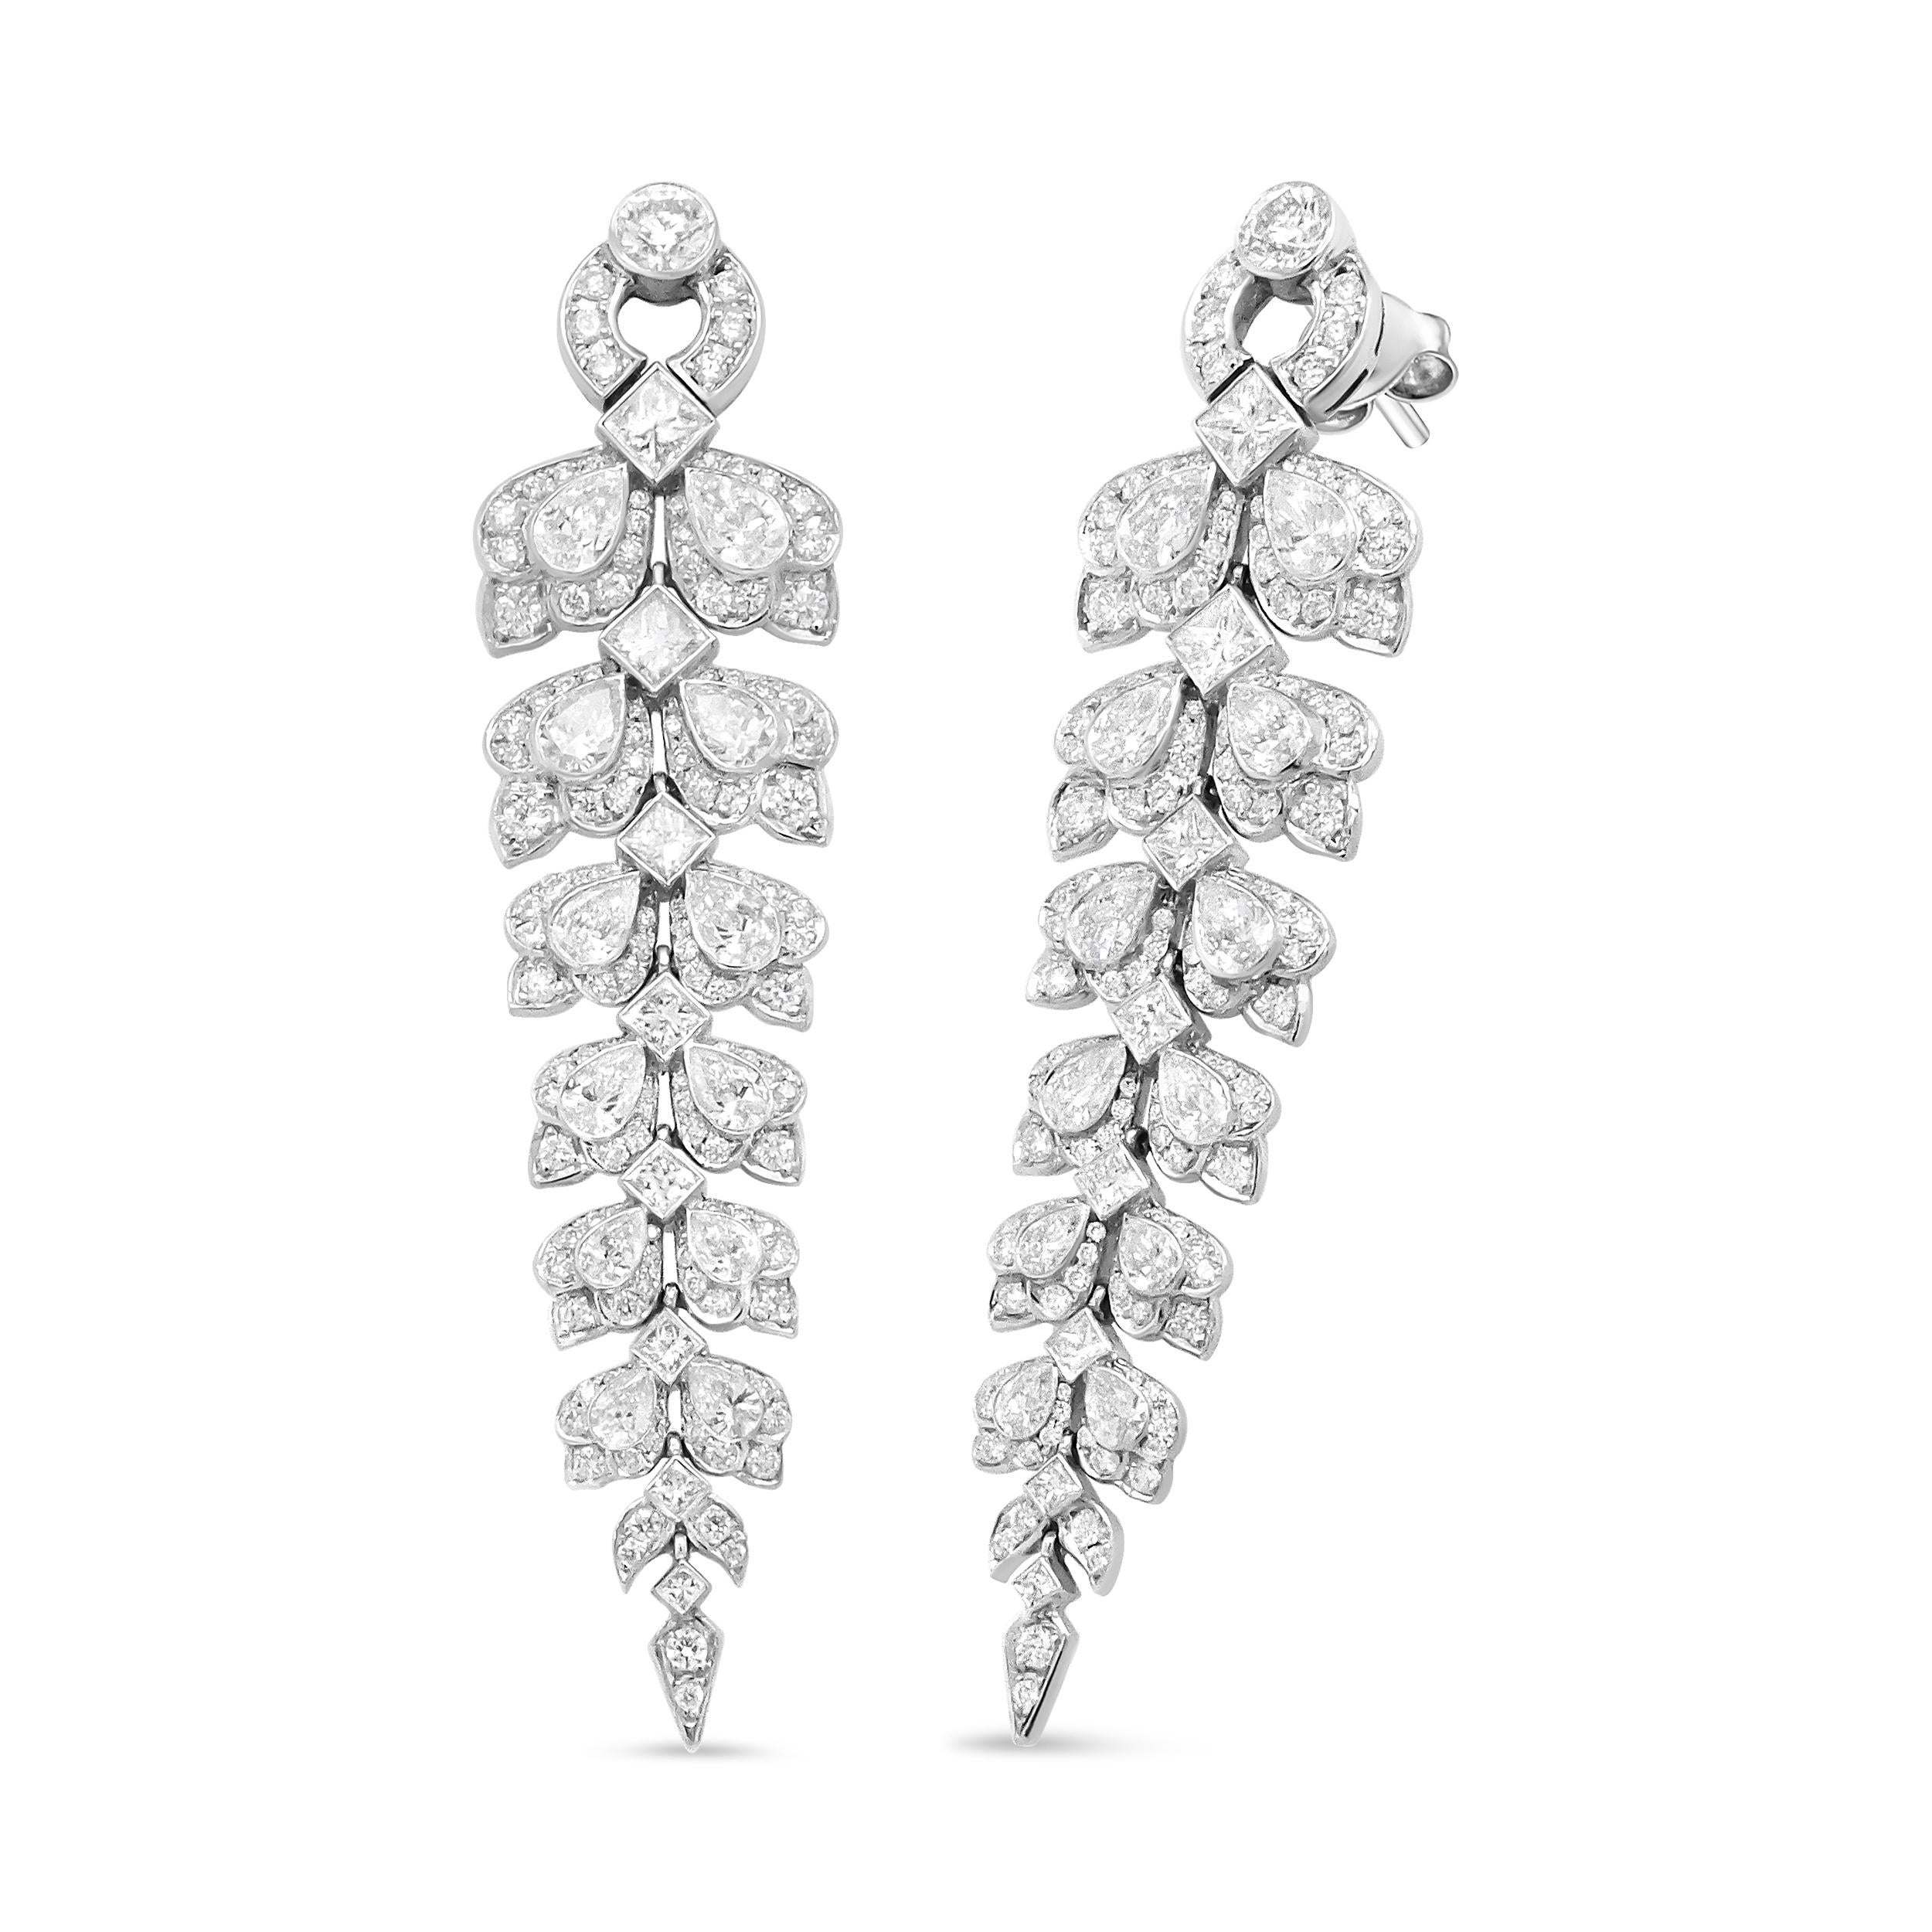 Drape your ears in the exquisite sparkle of 160 diamonds that cascade in an elegantly dramatic 2.5 inch drop. Indulge your collection and add luxurious drama to any ensemble with this sensational pair that transcends style in regal elegance. The